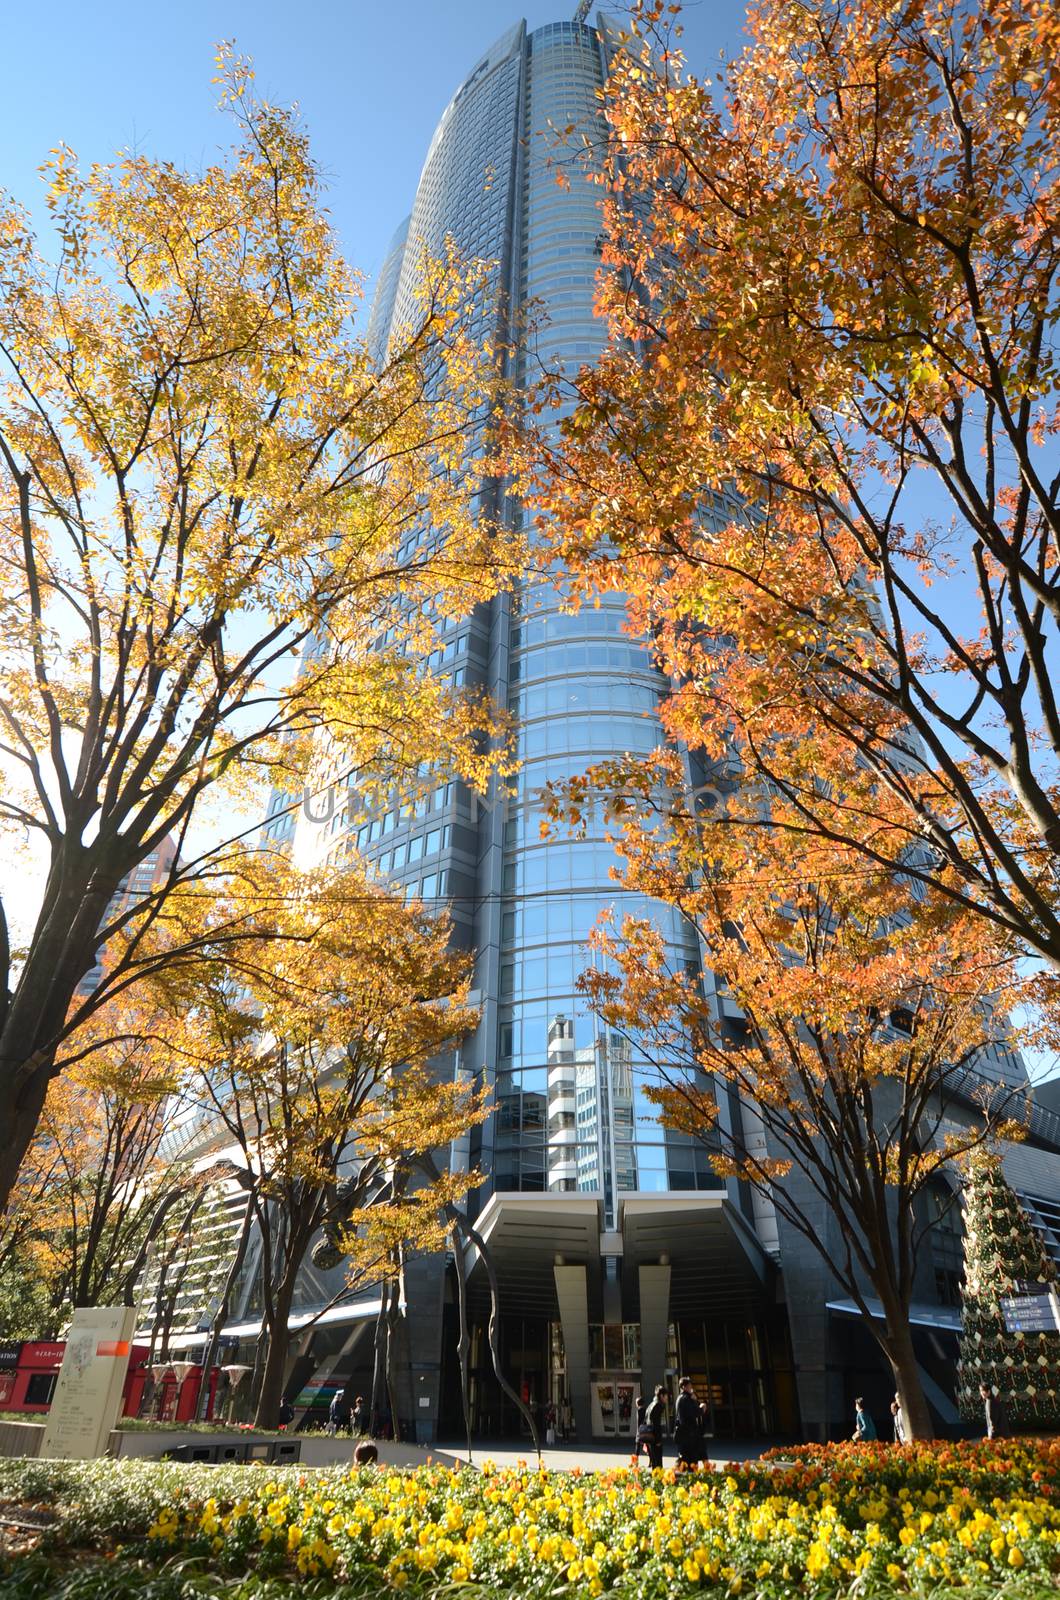 Tokyo, Japan - November 23, 2013: People visit the Mori Tower in Roppongi Hills on November 23, 2013, Roppongi Hills is a New Urban Centre and one of Japan's largest integrated property developments, located in the Roppongi district of Minato, Tokyo.